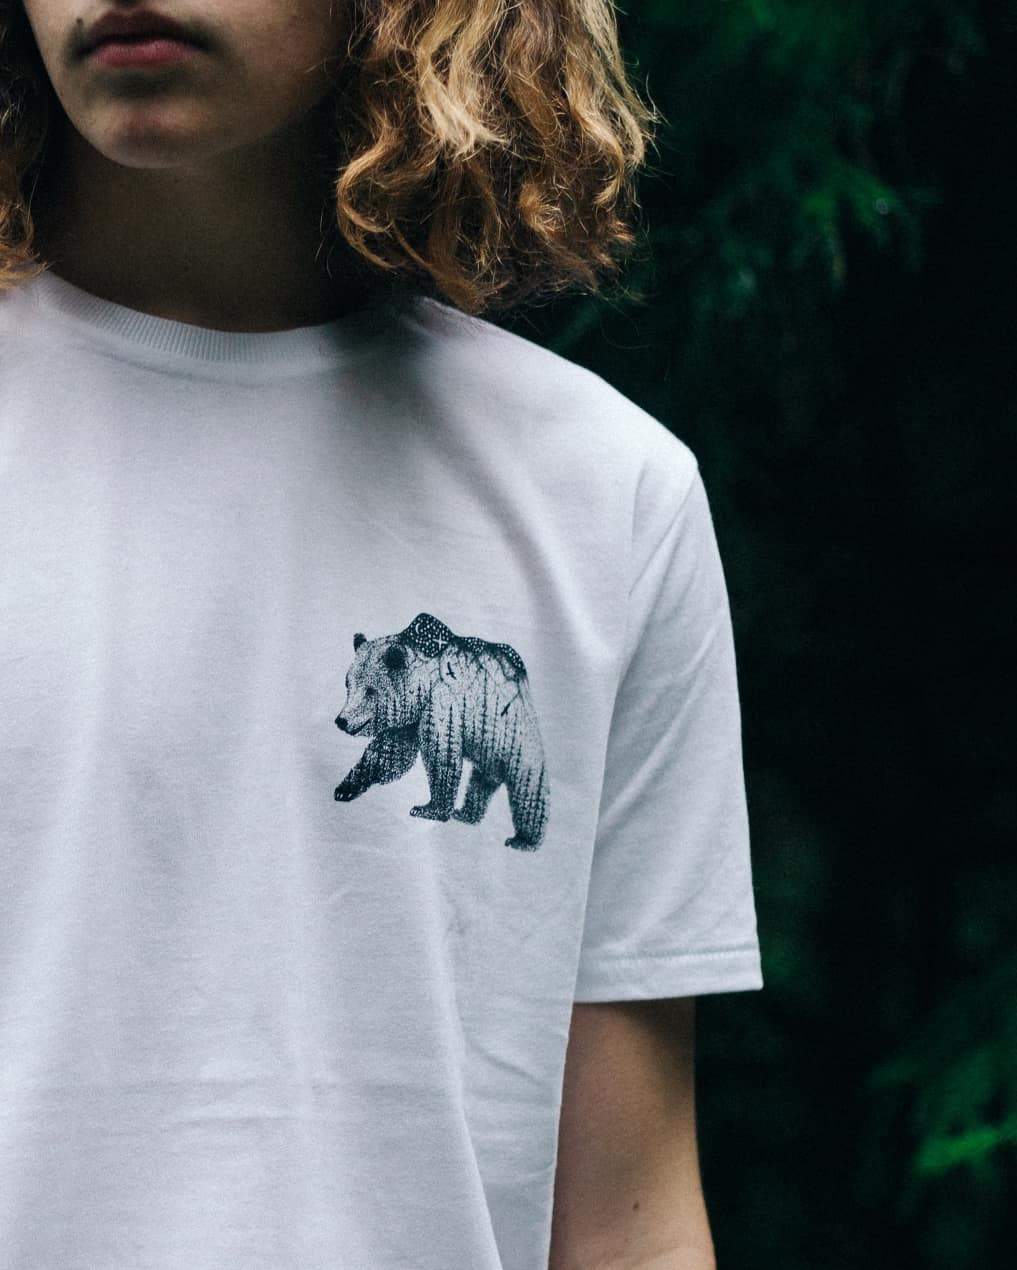 Man with midlength wavy hair wearing an Illustrate 'The Wandering Bear' t-shirt